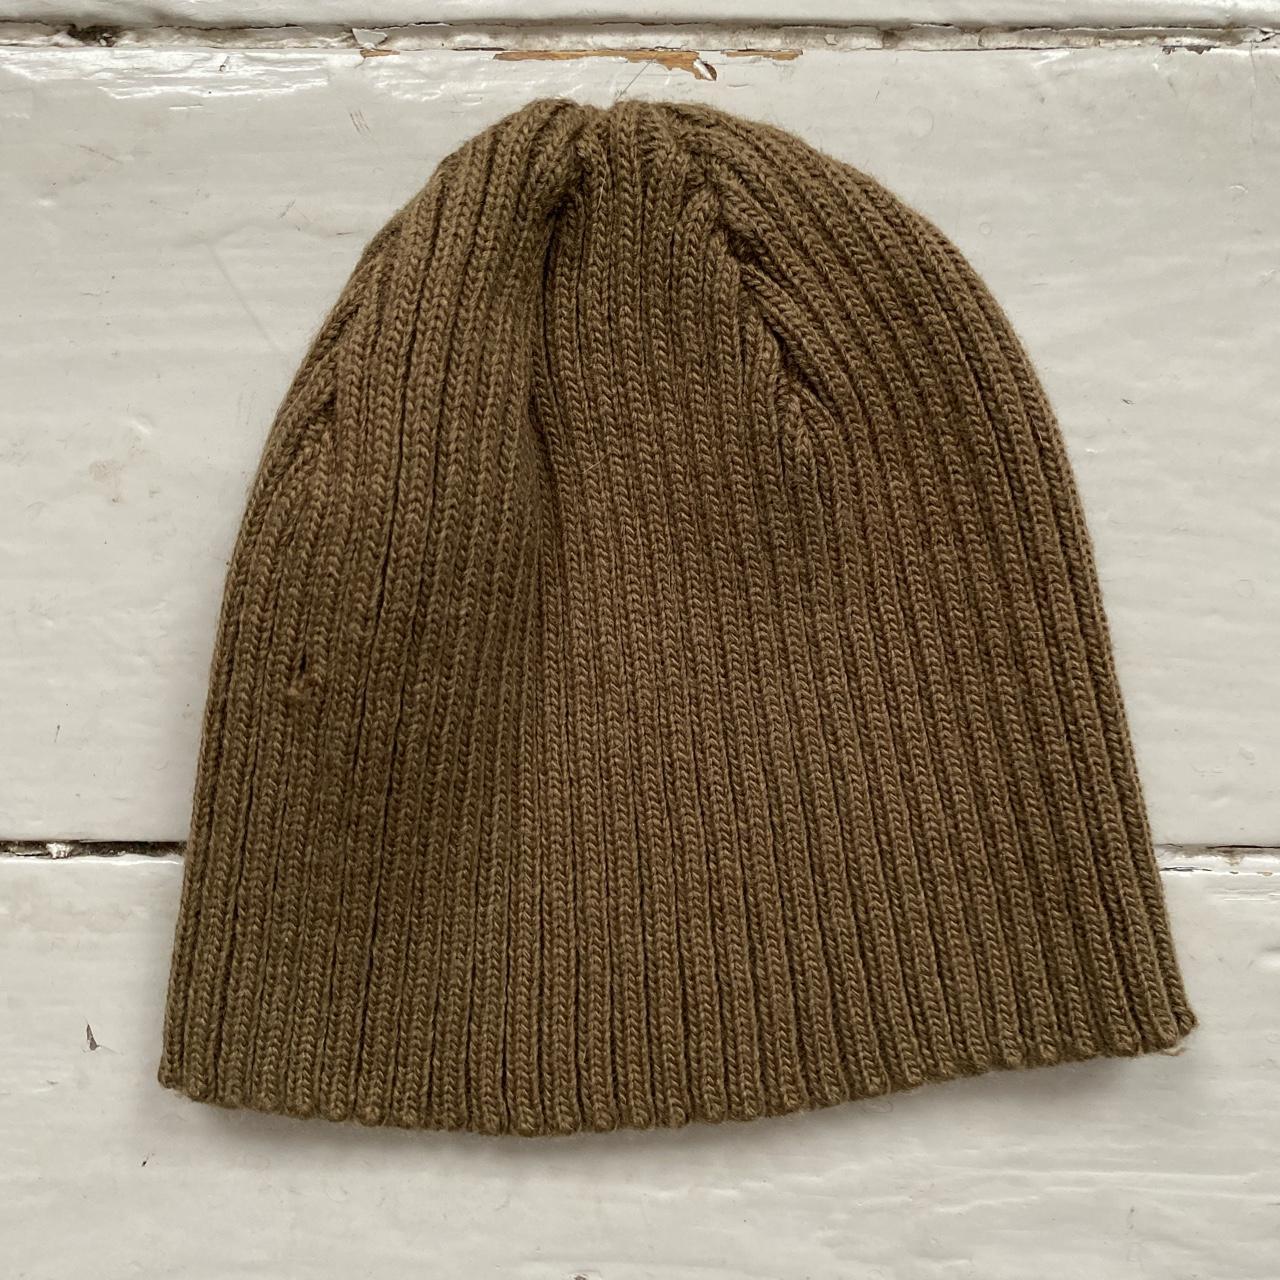 Lacoste Beanie Brown with Croc 🐊 In good clean... - Depop